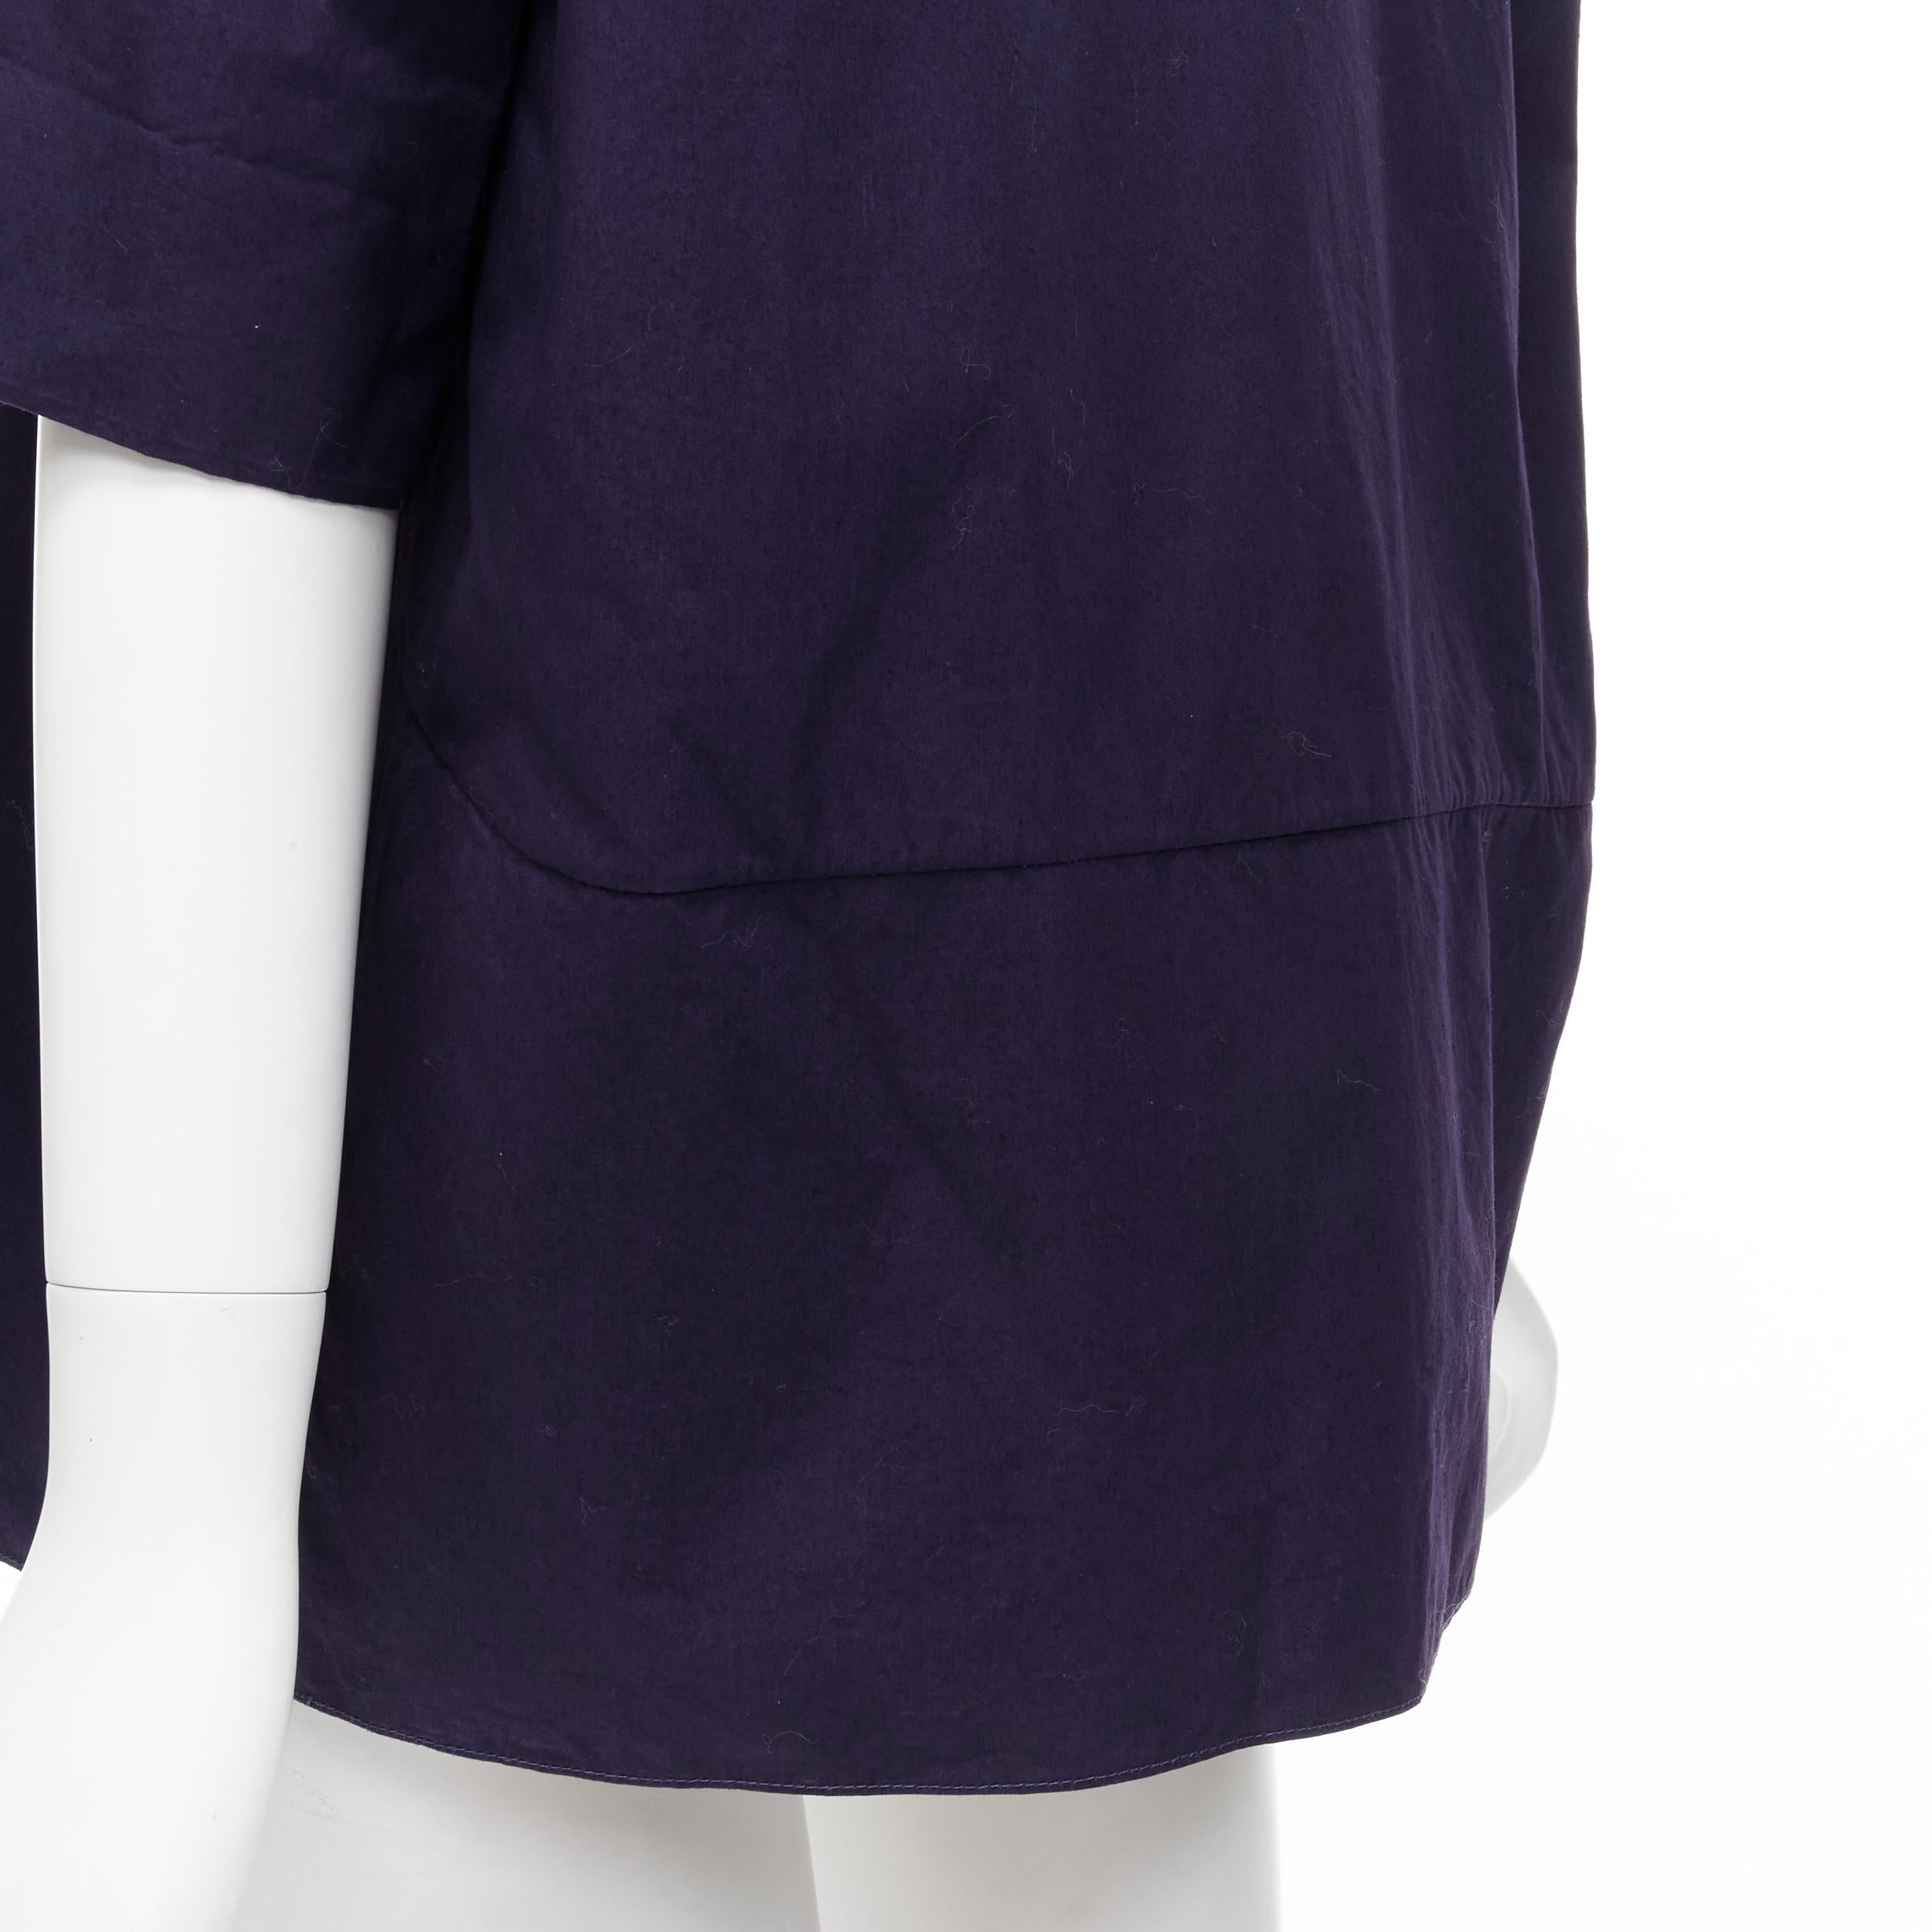 MARNI purple cotton curved seam V-neck oversized boxy polo shirt top IT44 M 
Reference: CELG/A00133 
Brand: Marni 
Material: Cotton 
Color: Purple 
Pattern: Solid 
Made in: Italy 

CONDITION: 
Condition: Excellent, this item was pre-owned and is in